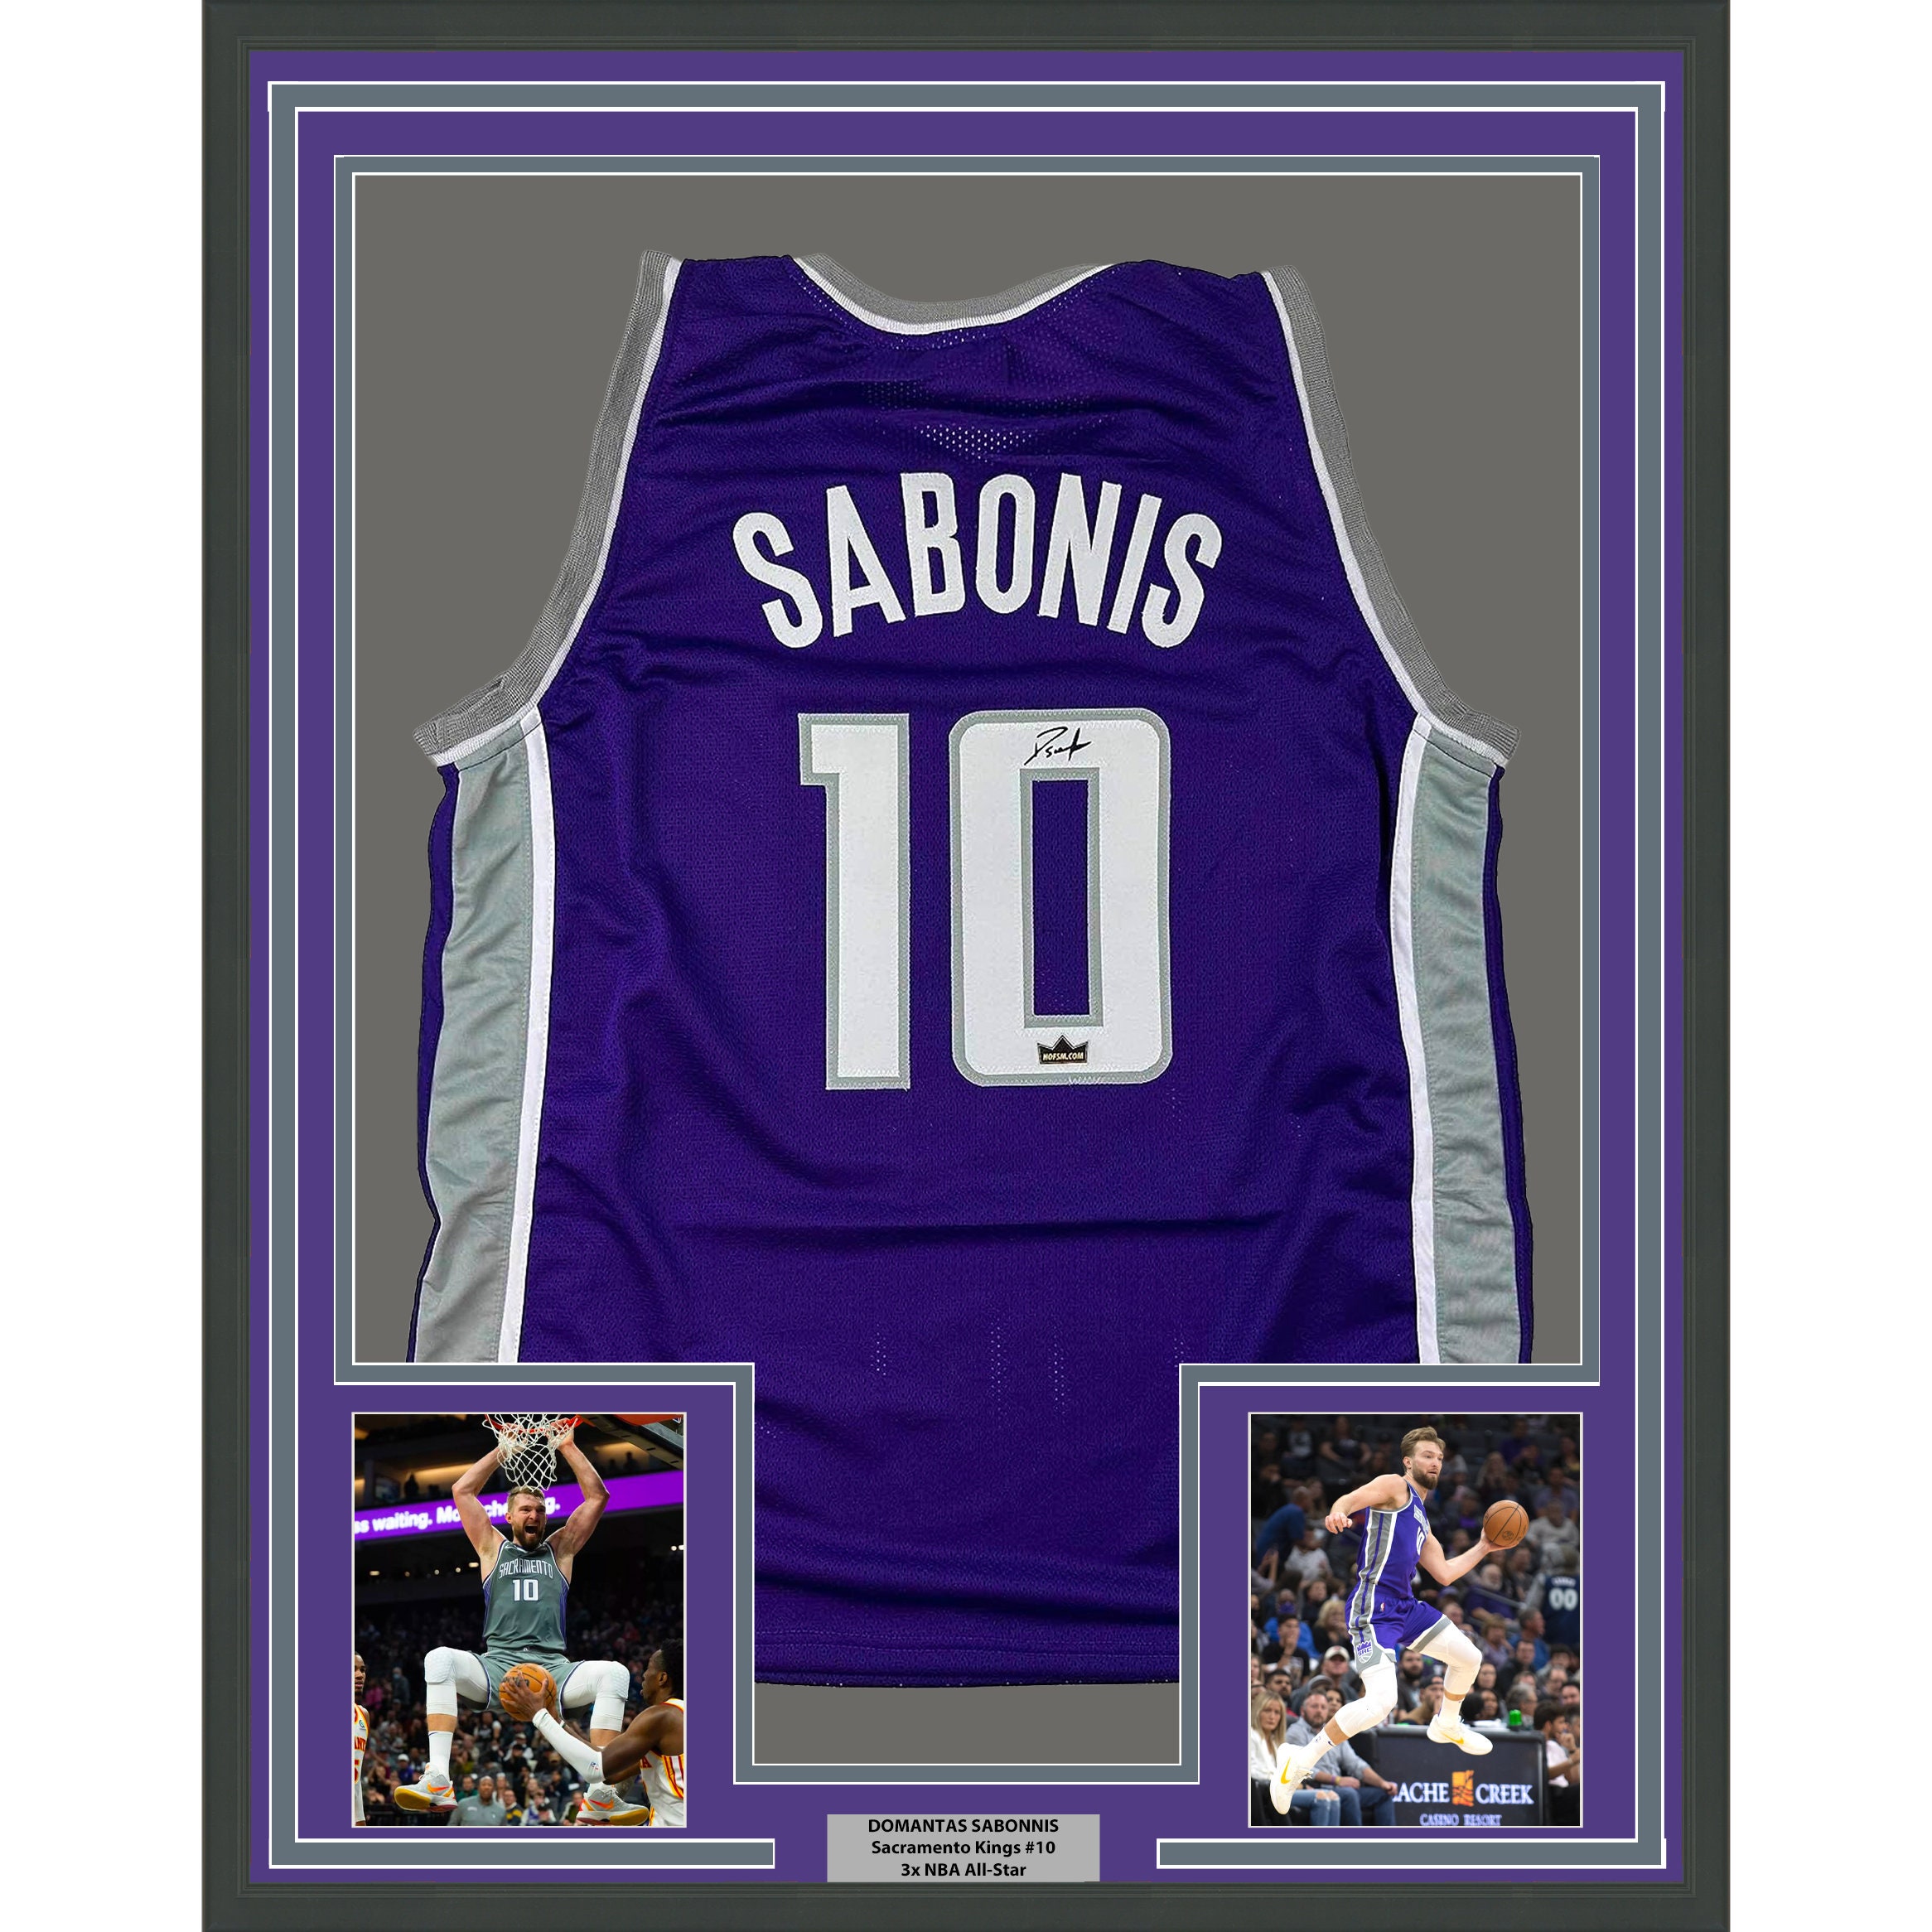 Team store selling old player made blanks. They added Fox and Sabonis : r/ kings